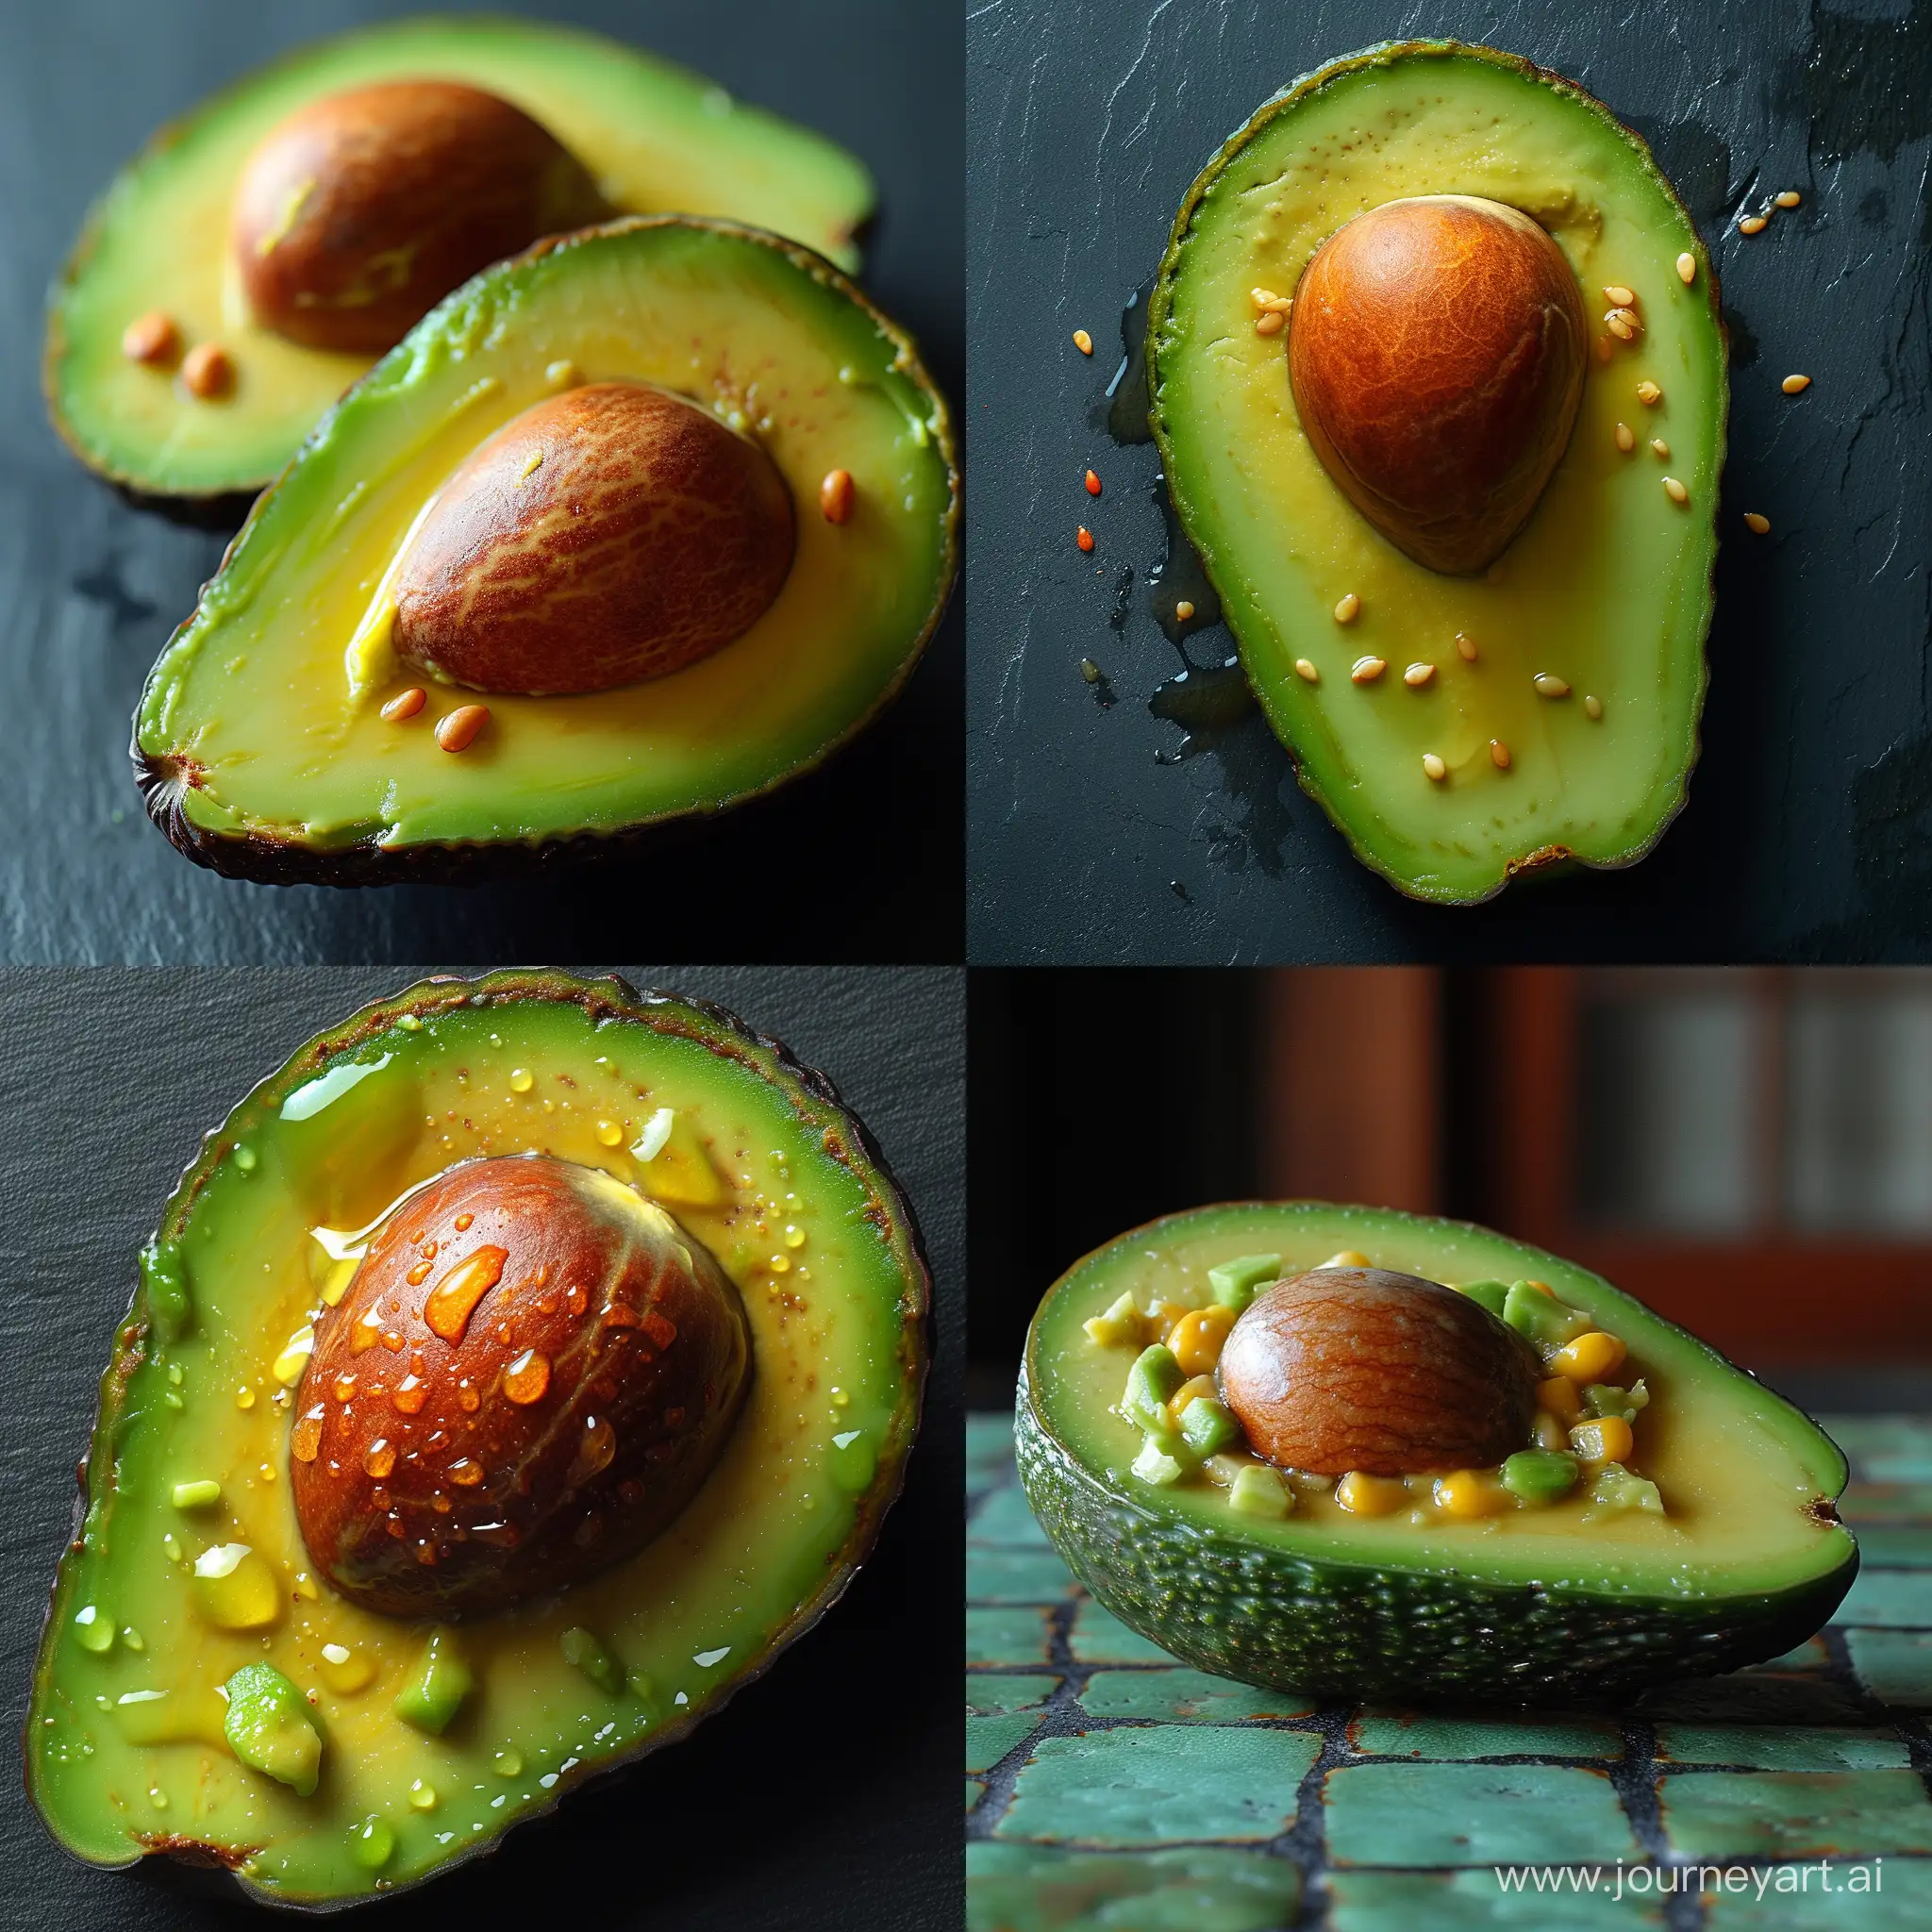 Epic-and-Cool-Avocado-Slice-Art-with-Vibrant-Colors